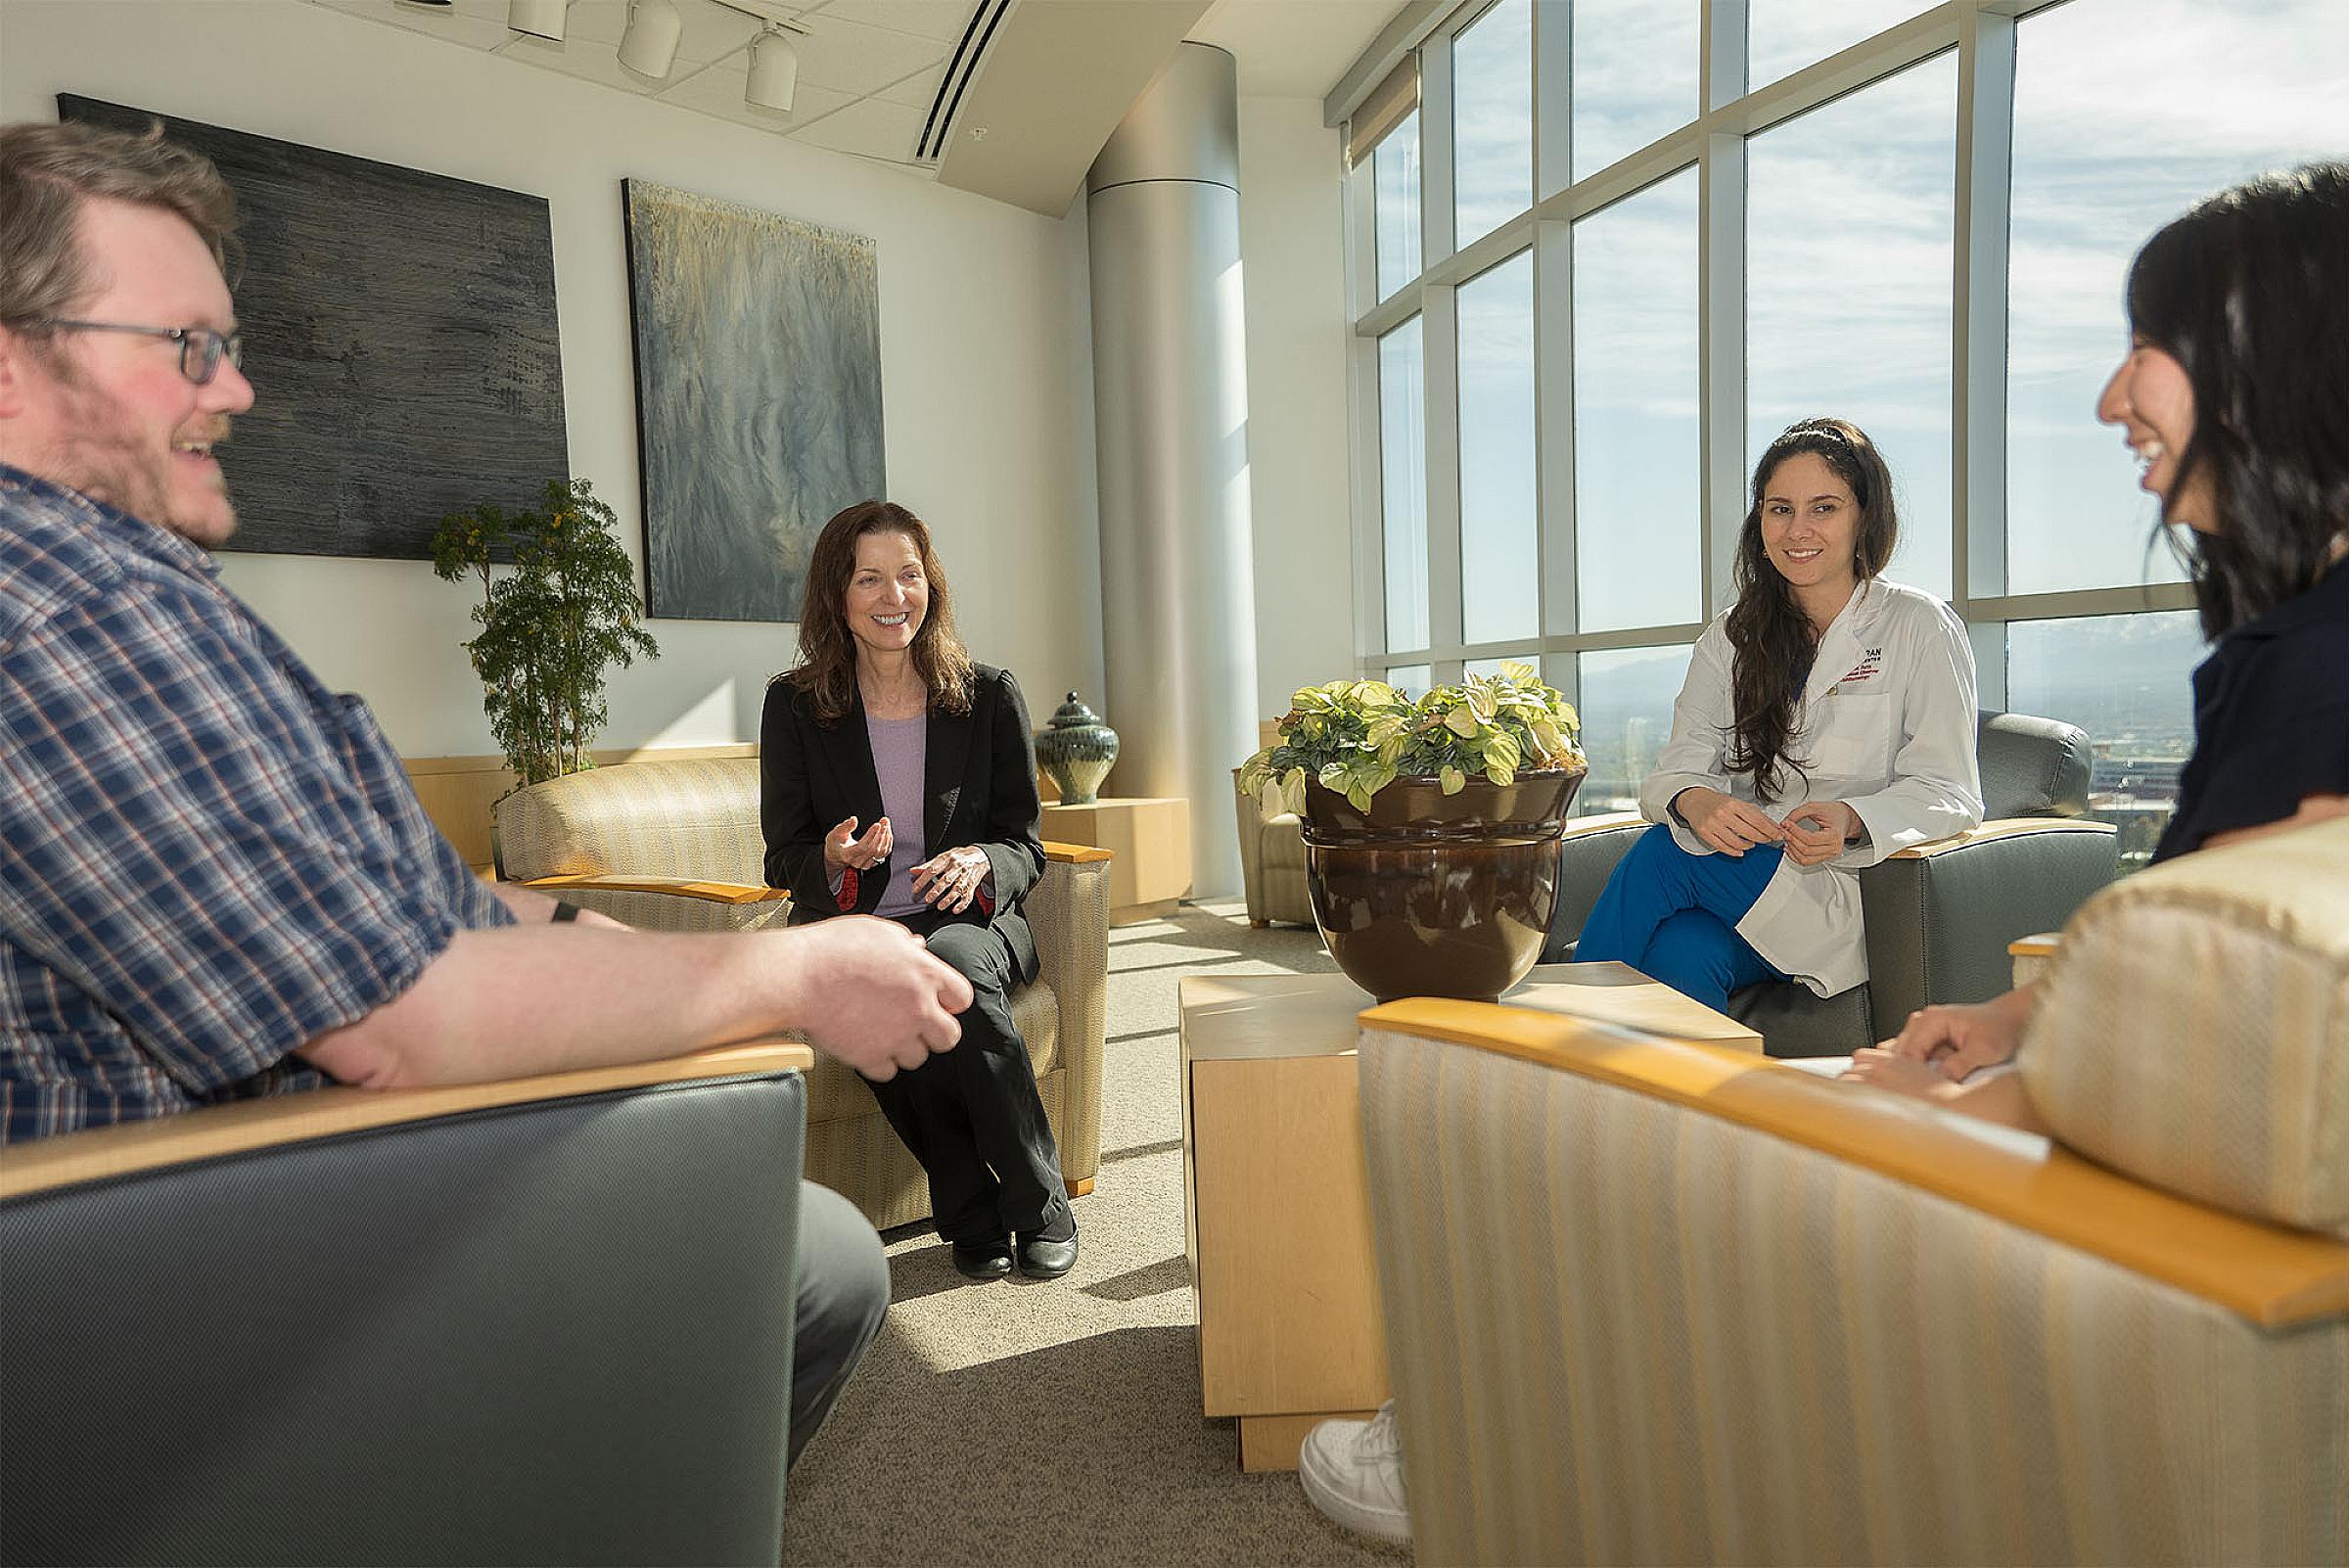 Mary Elizabeth Hartnett, MD, center, meets with a group associated with her lab, from left, Eric Kunz, Maria Margarita Parra, and Sarah Lee.